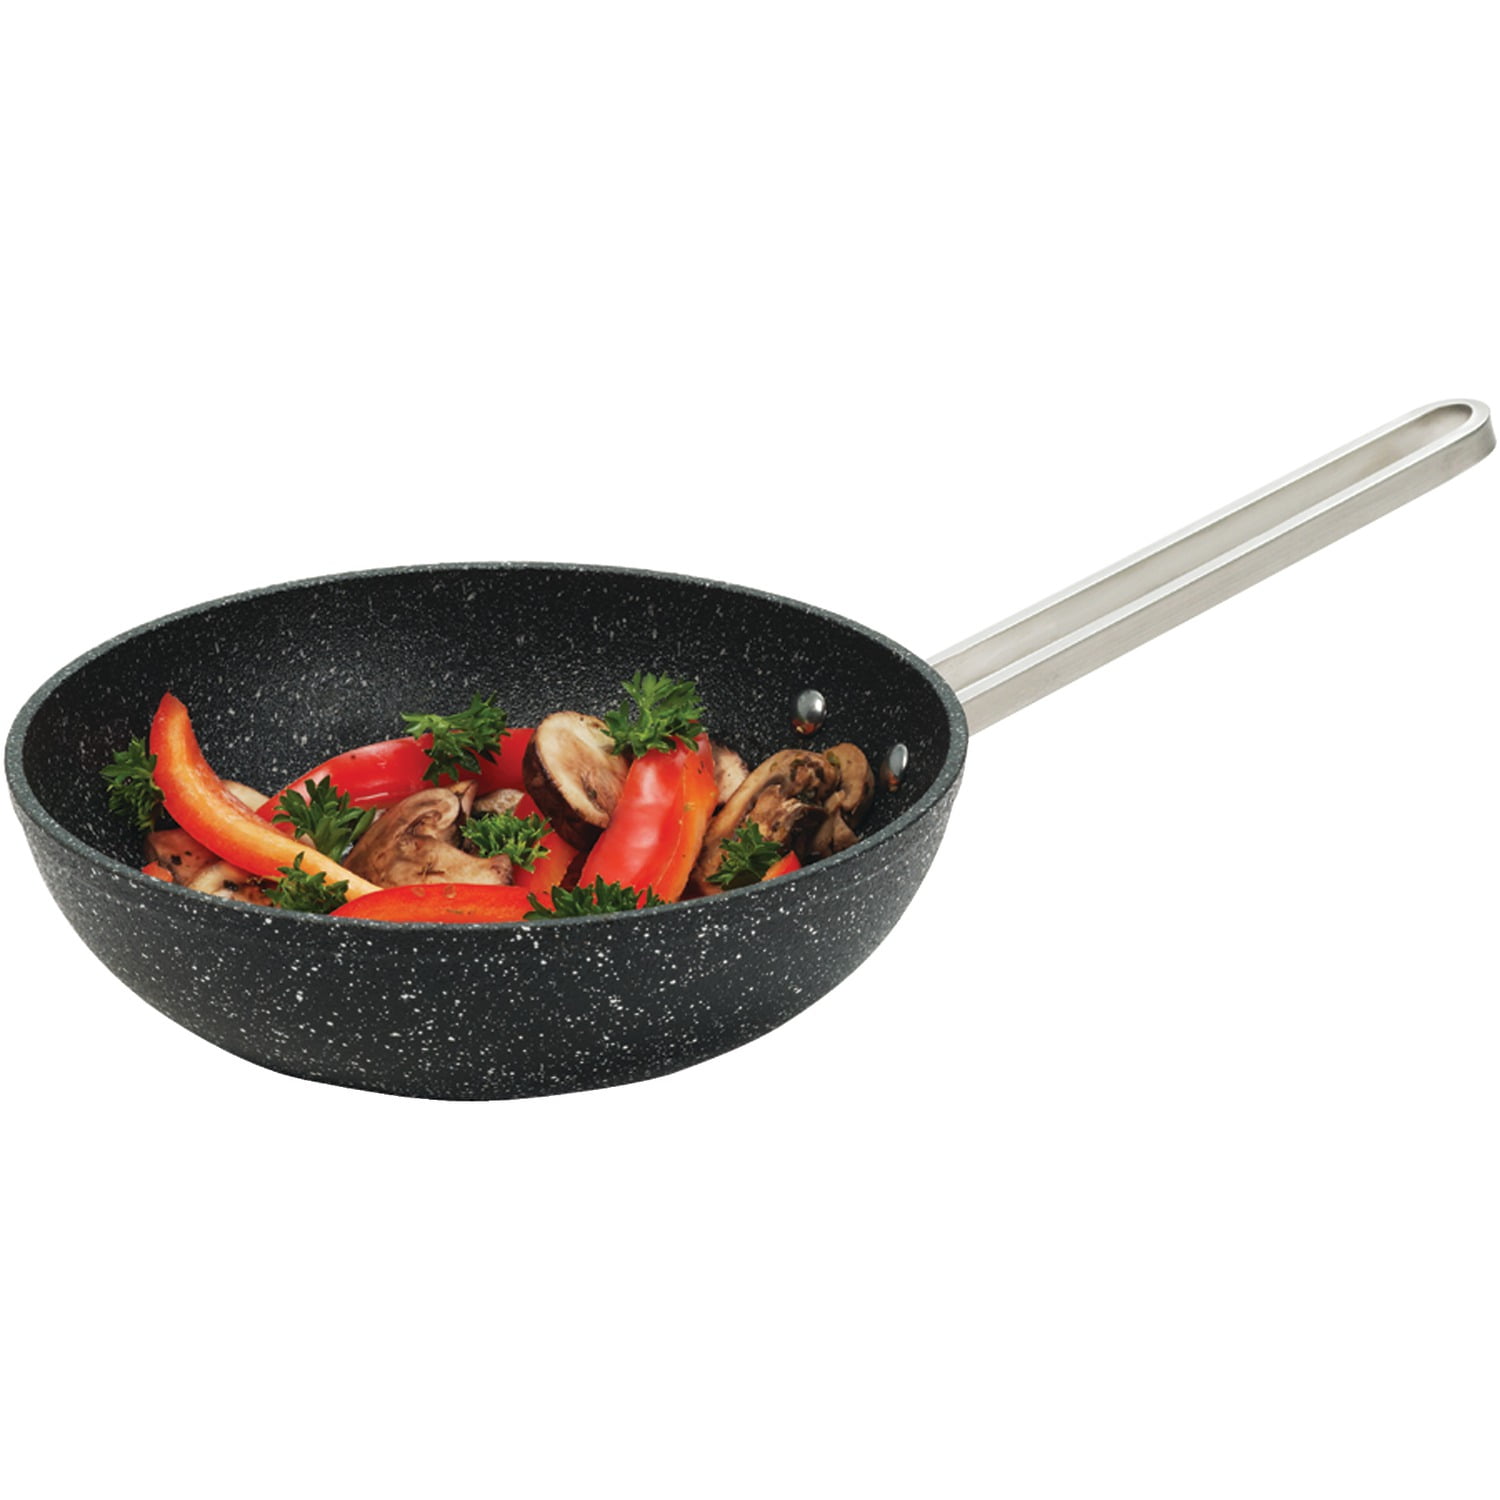 THE ROCK by Starfrit Multi-Pan with Stainless Steel Wire Handle